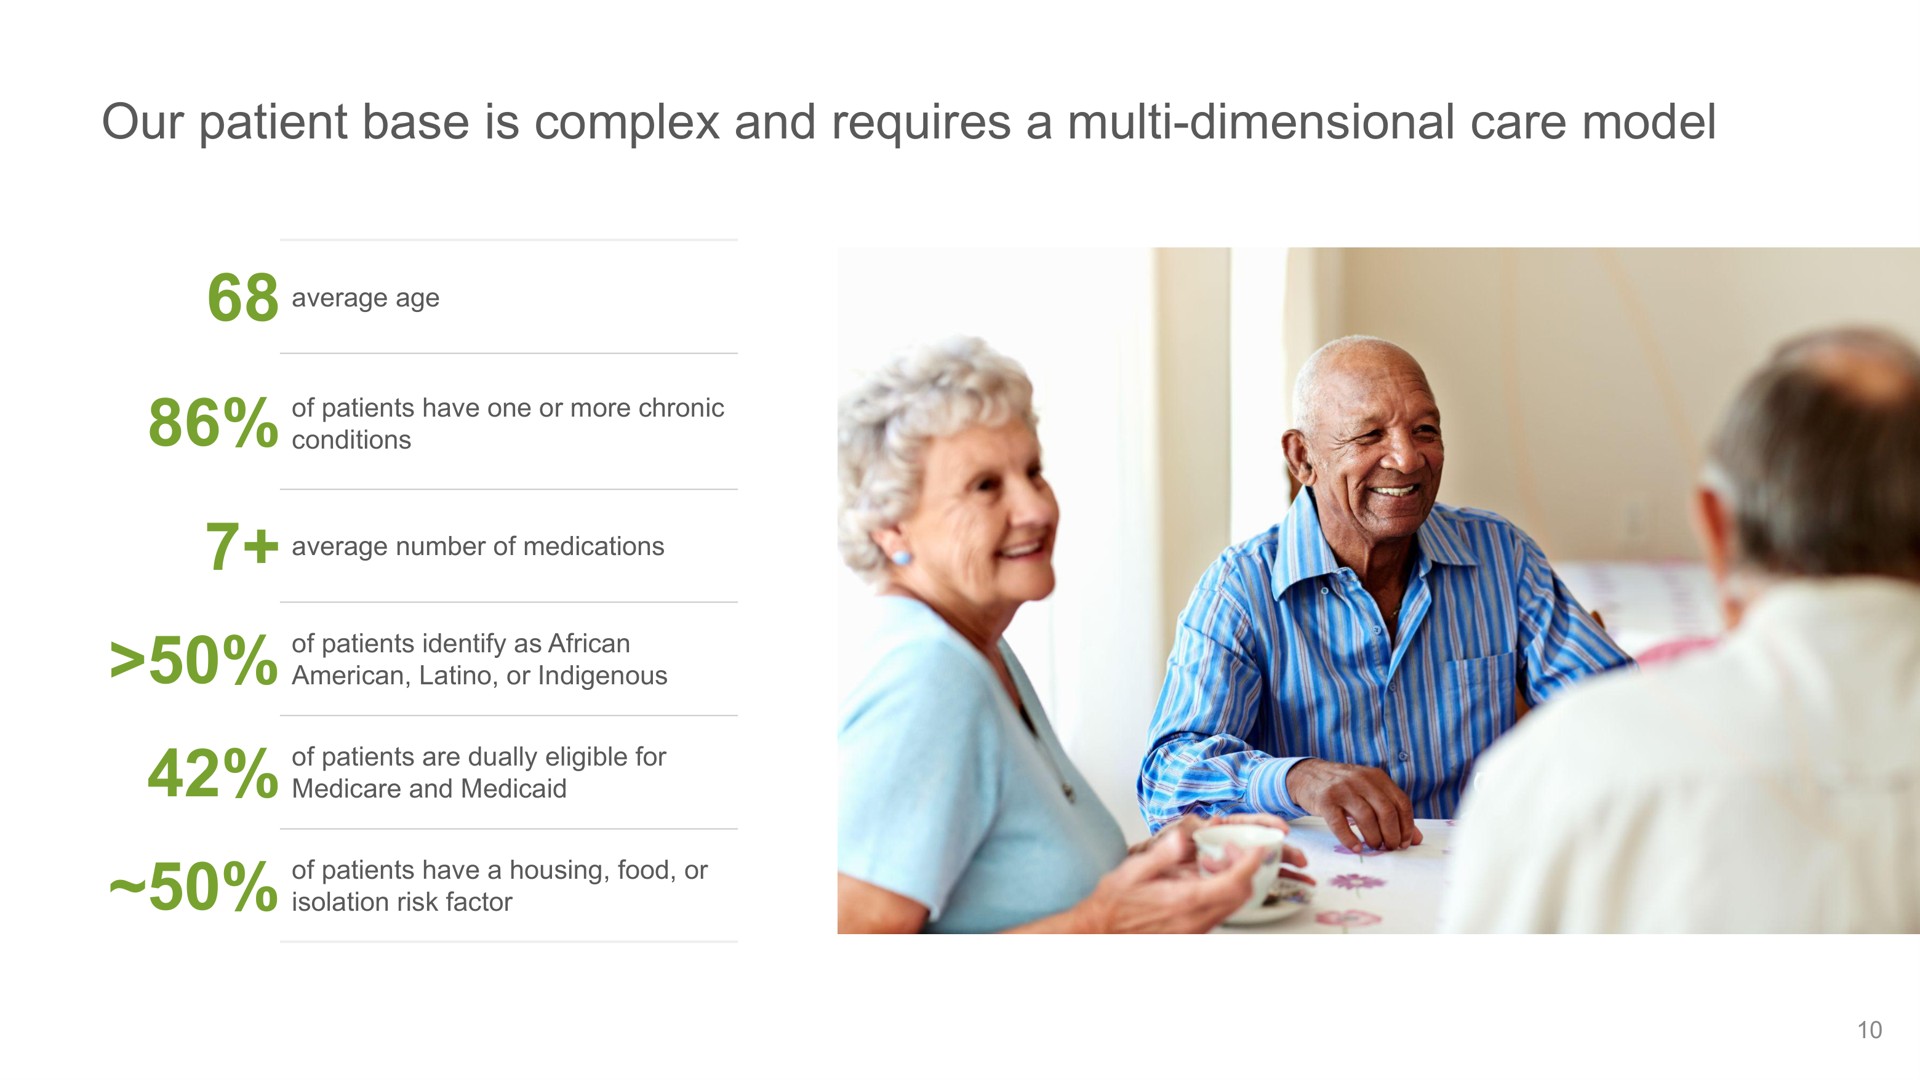 our patient base is complex and requires a dimensional care model | Oak Street Health